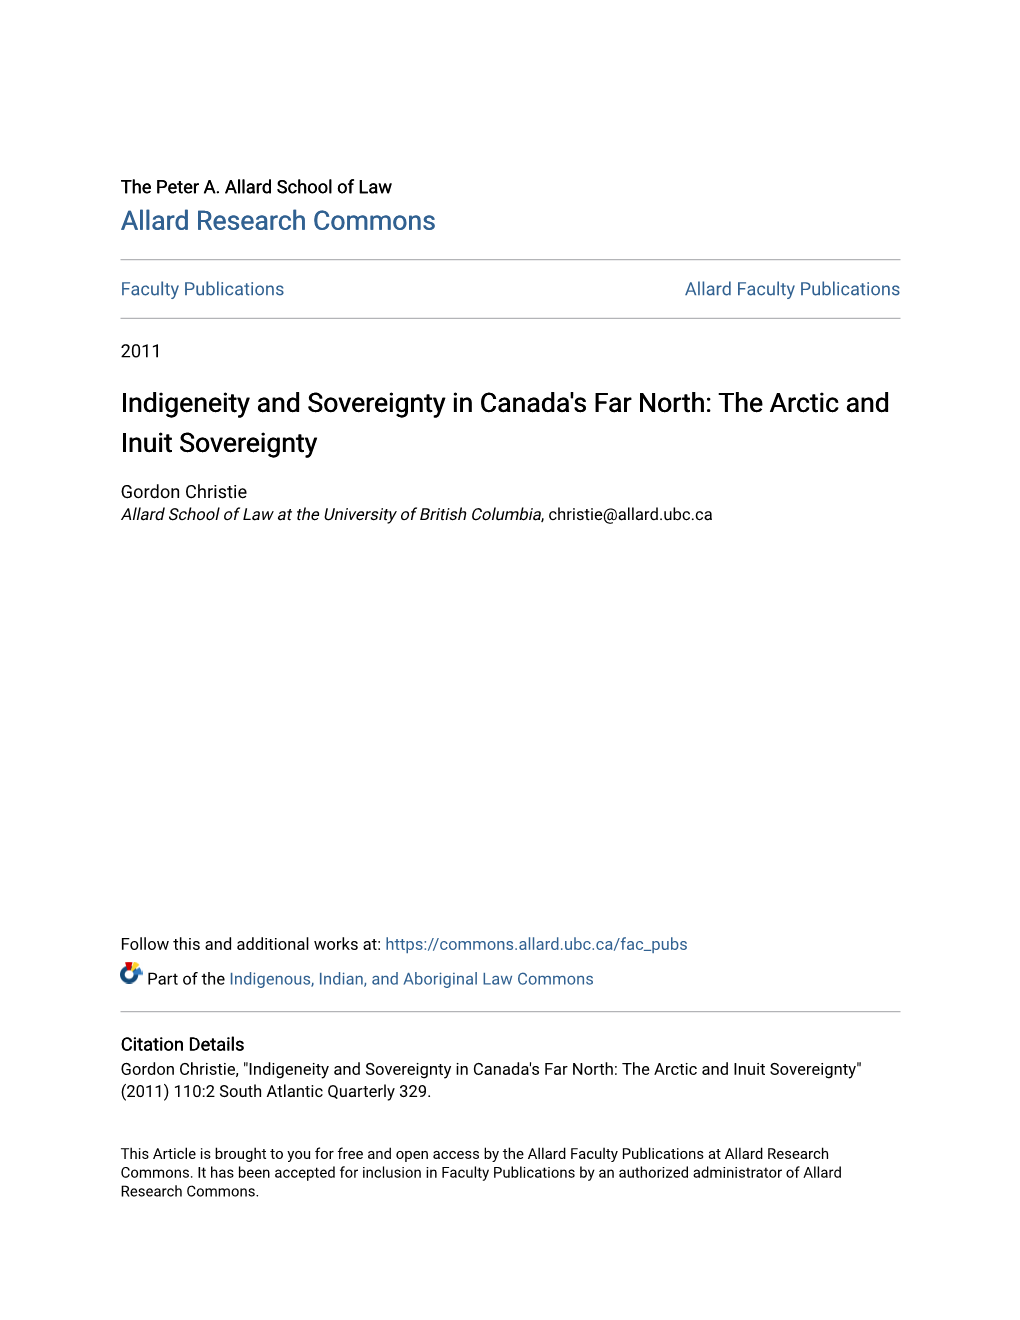 The Arctic and Inuit Sovereignty